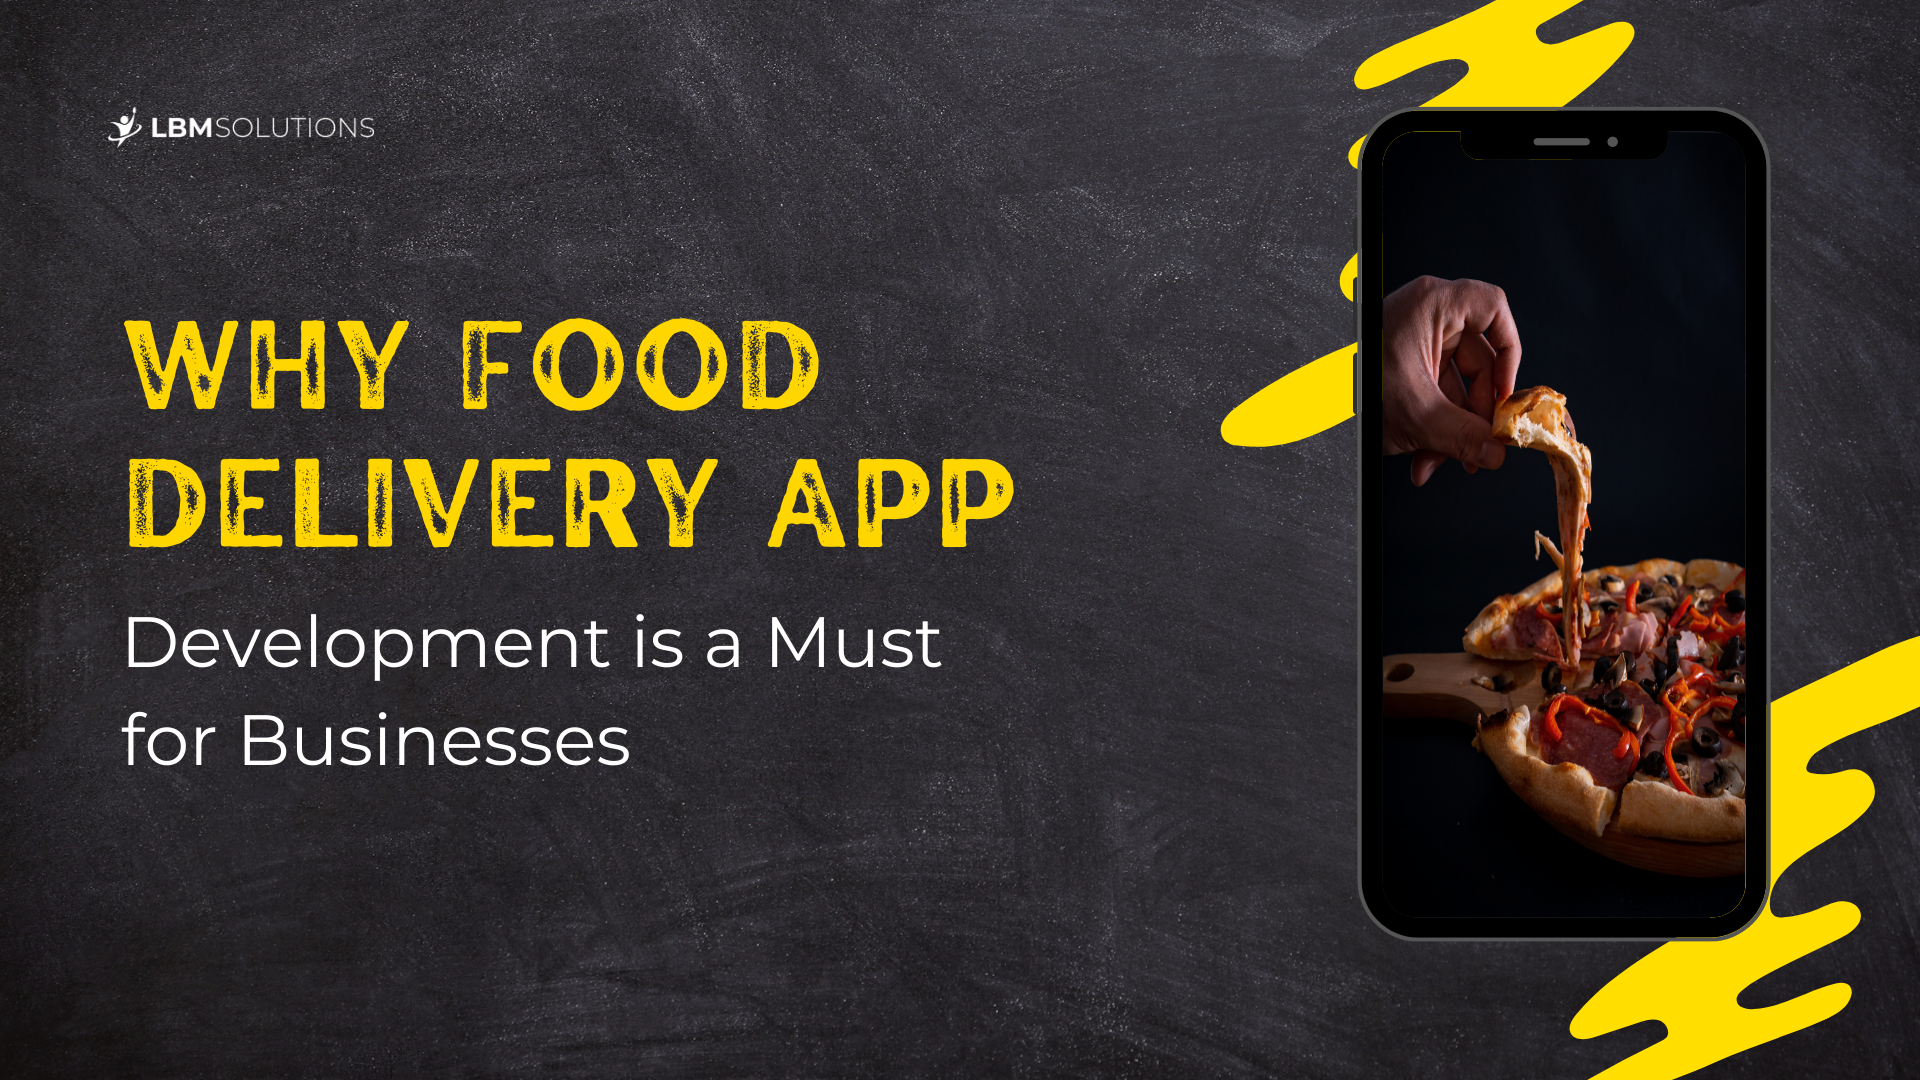 Why Food Delivery App Development is a Must for Businesses